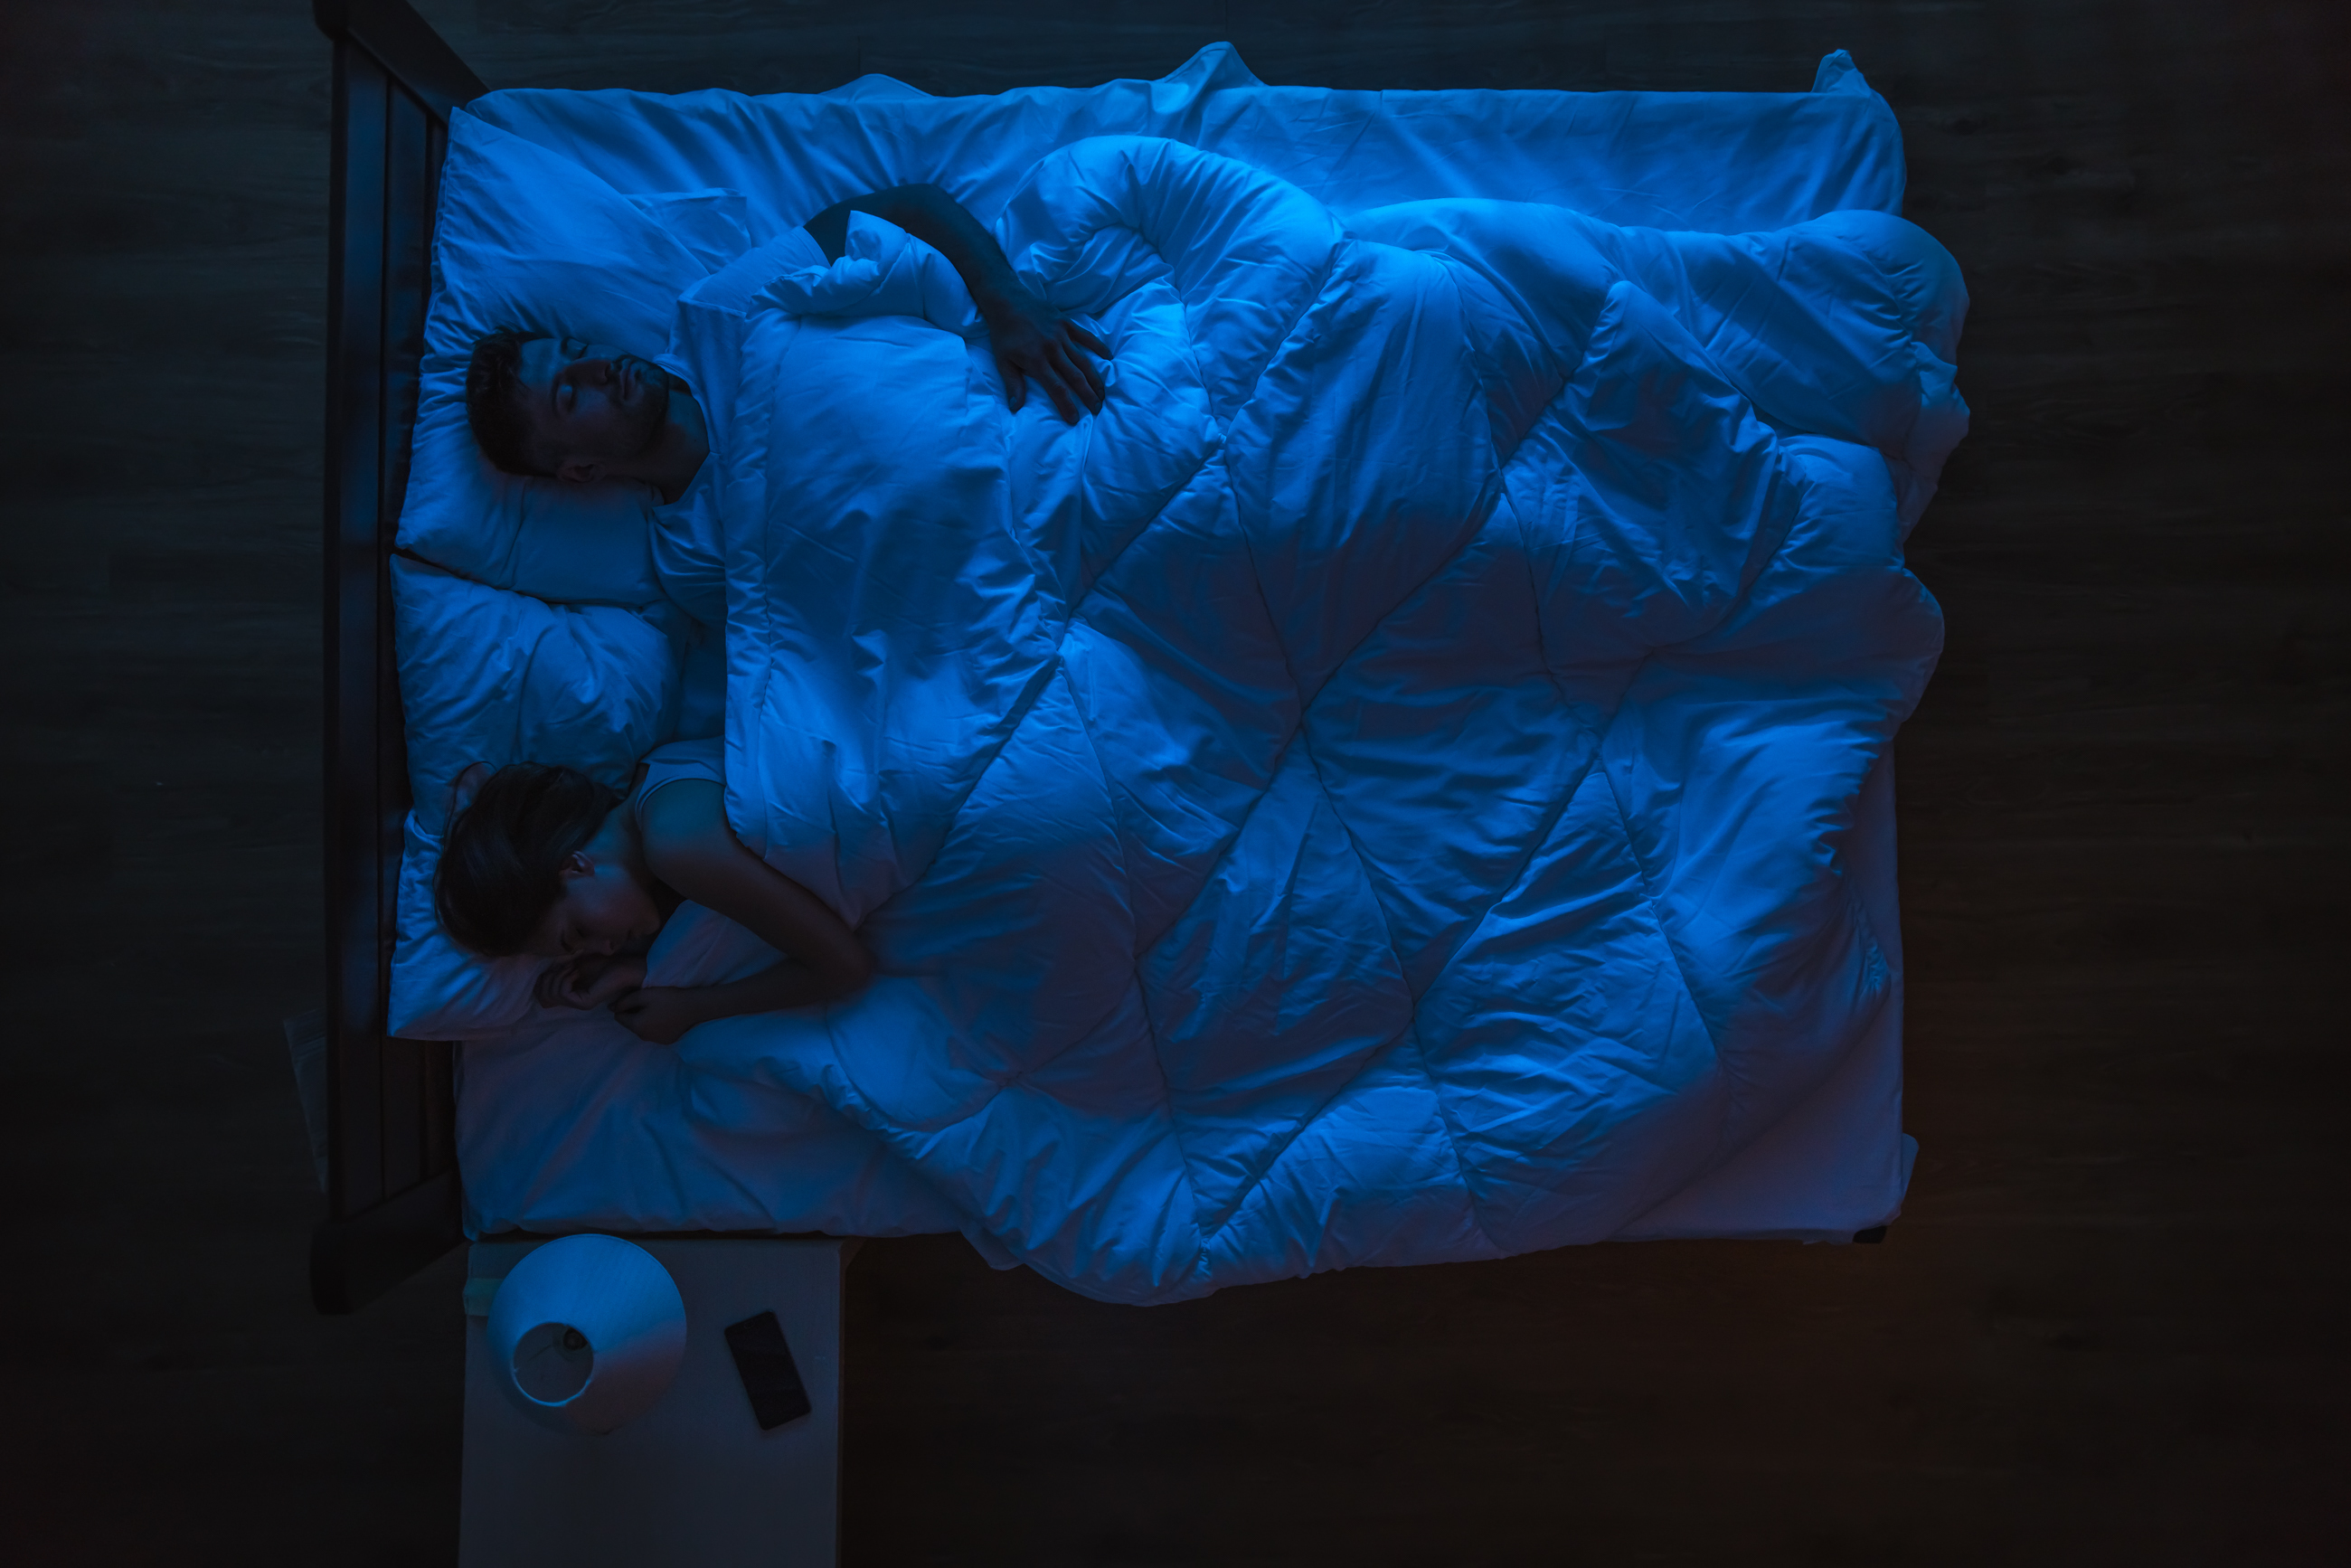 The couple sleeping on a bed. Evening night time. | Source: Shutterstock